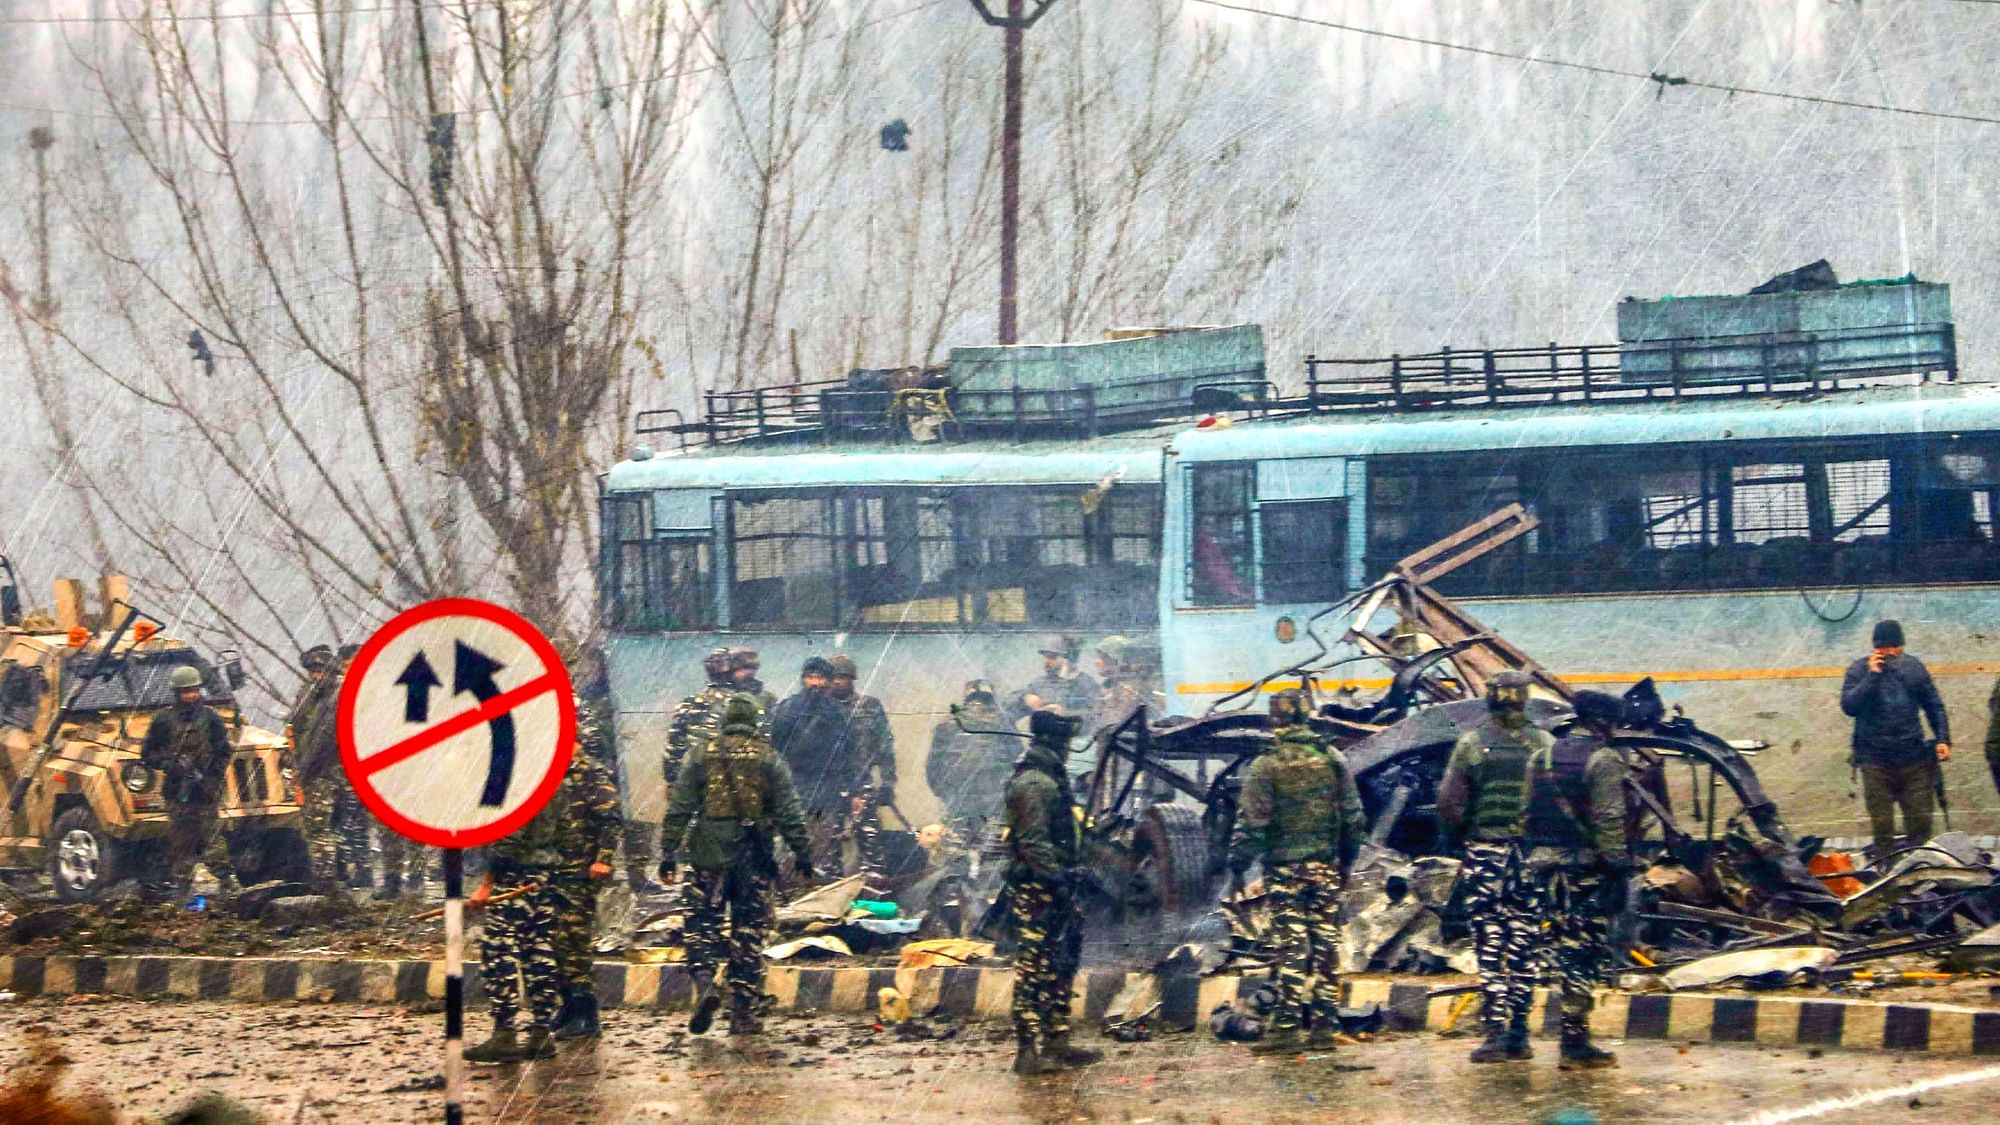 Security personnel carry out rescue and relief work at the site of the suicide bomb attack in Pulwama district of J&amp;K, on 14 February 2019.&nbsp;